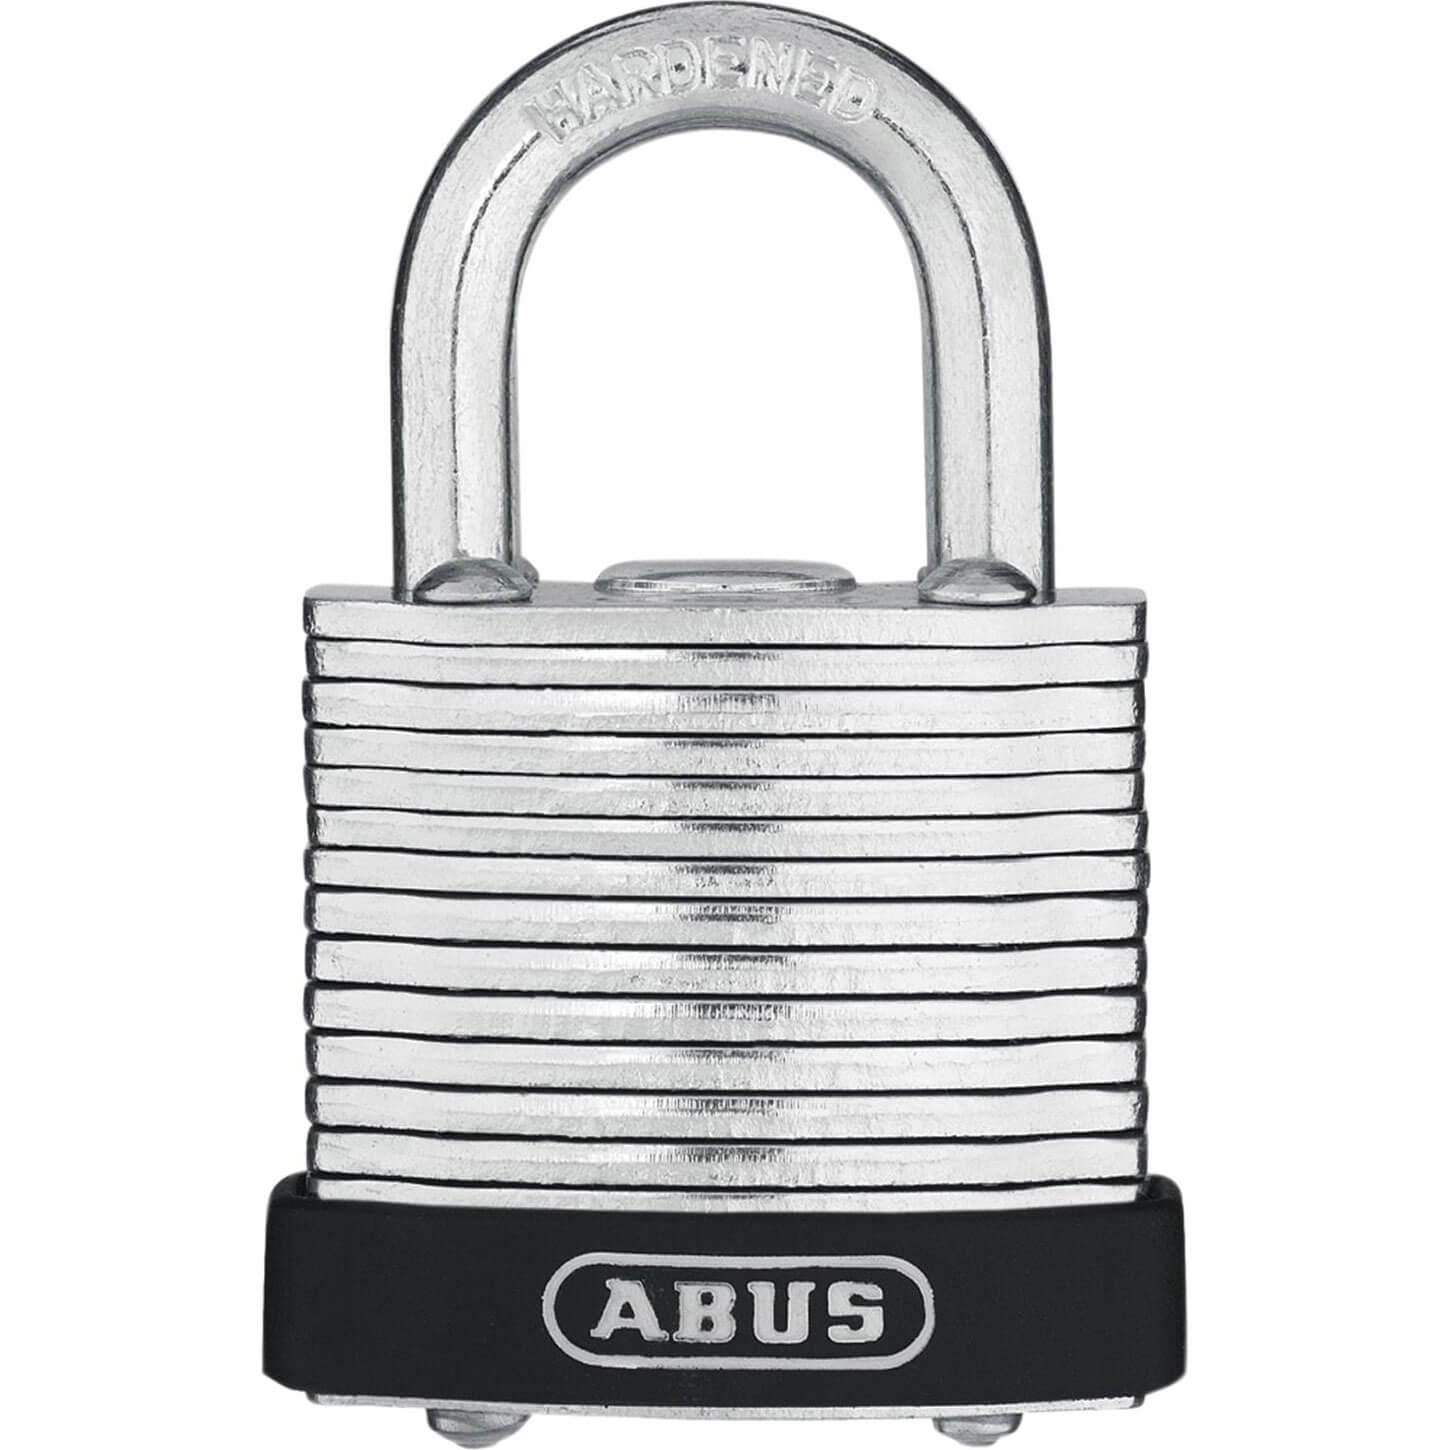 Click to view product details and reviews for Abus 41 Series Laminated Steel Padlock 30mm Standard.